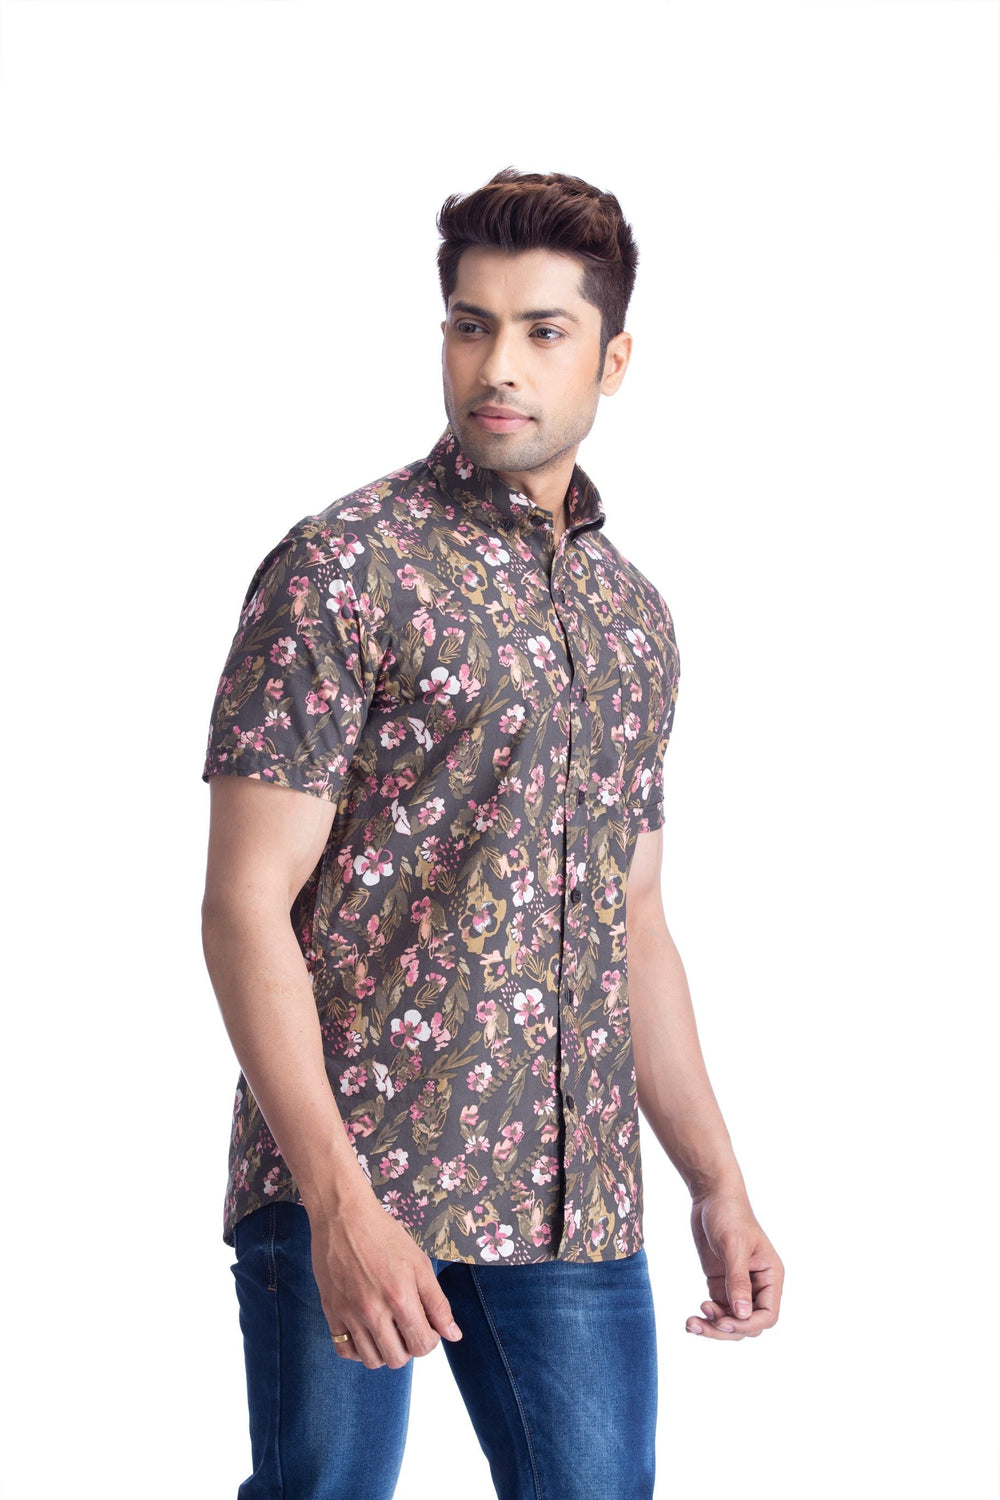 Brown floral Casual shirt